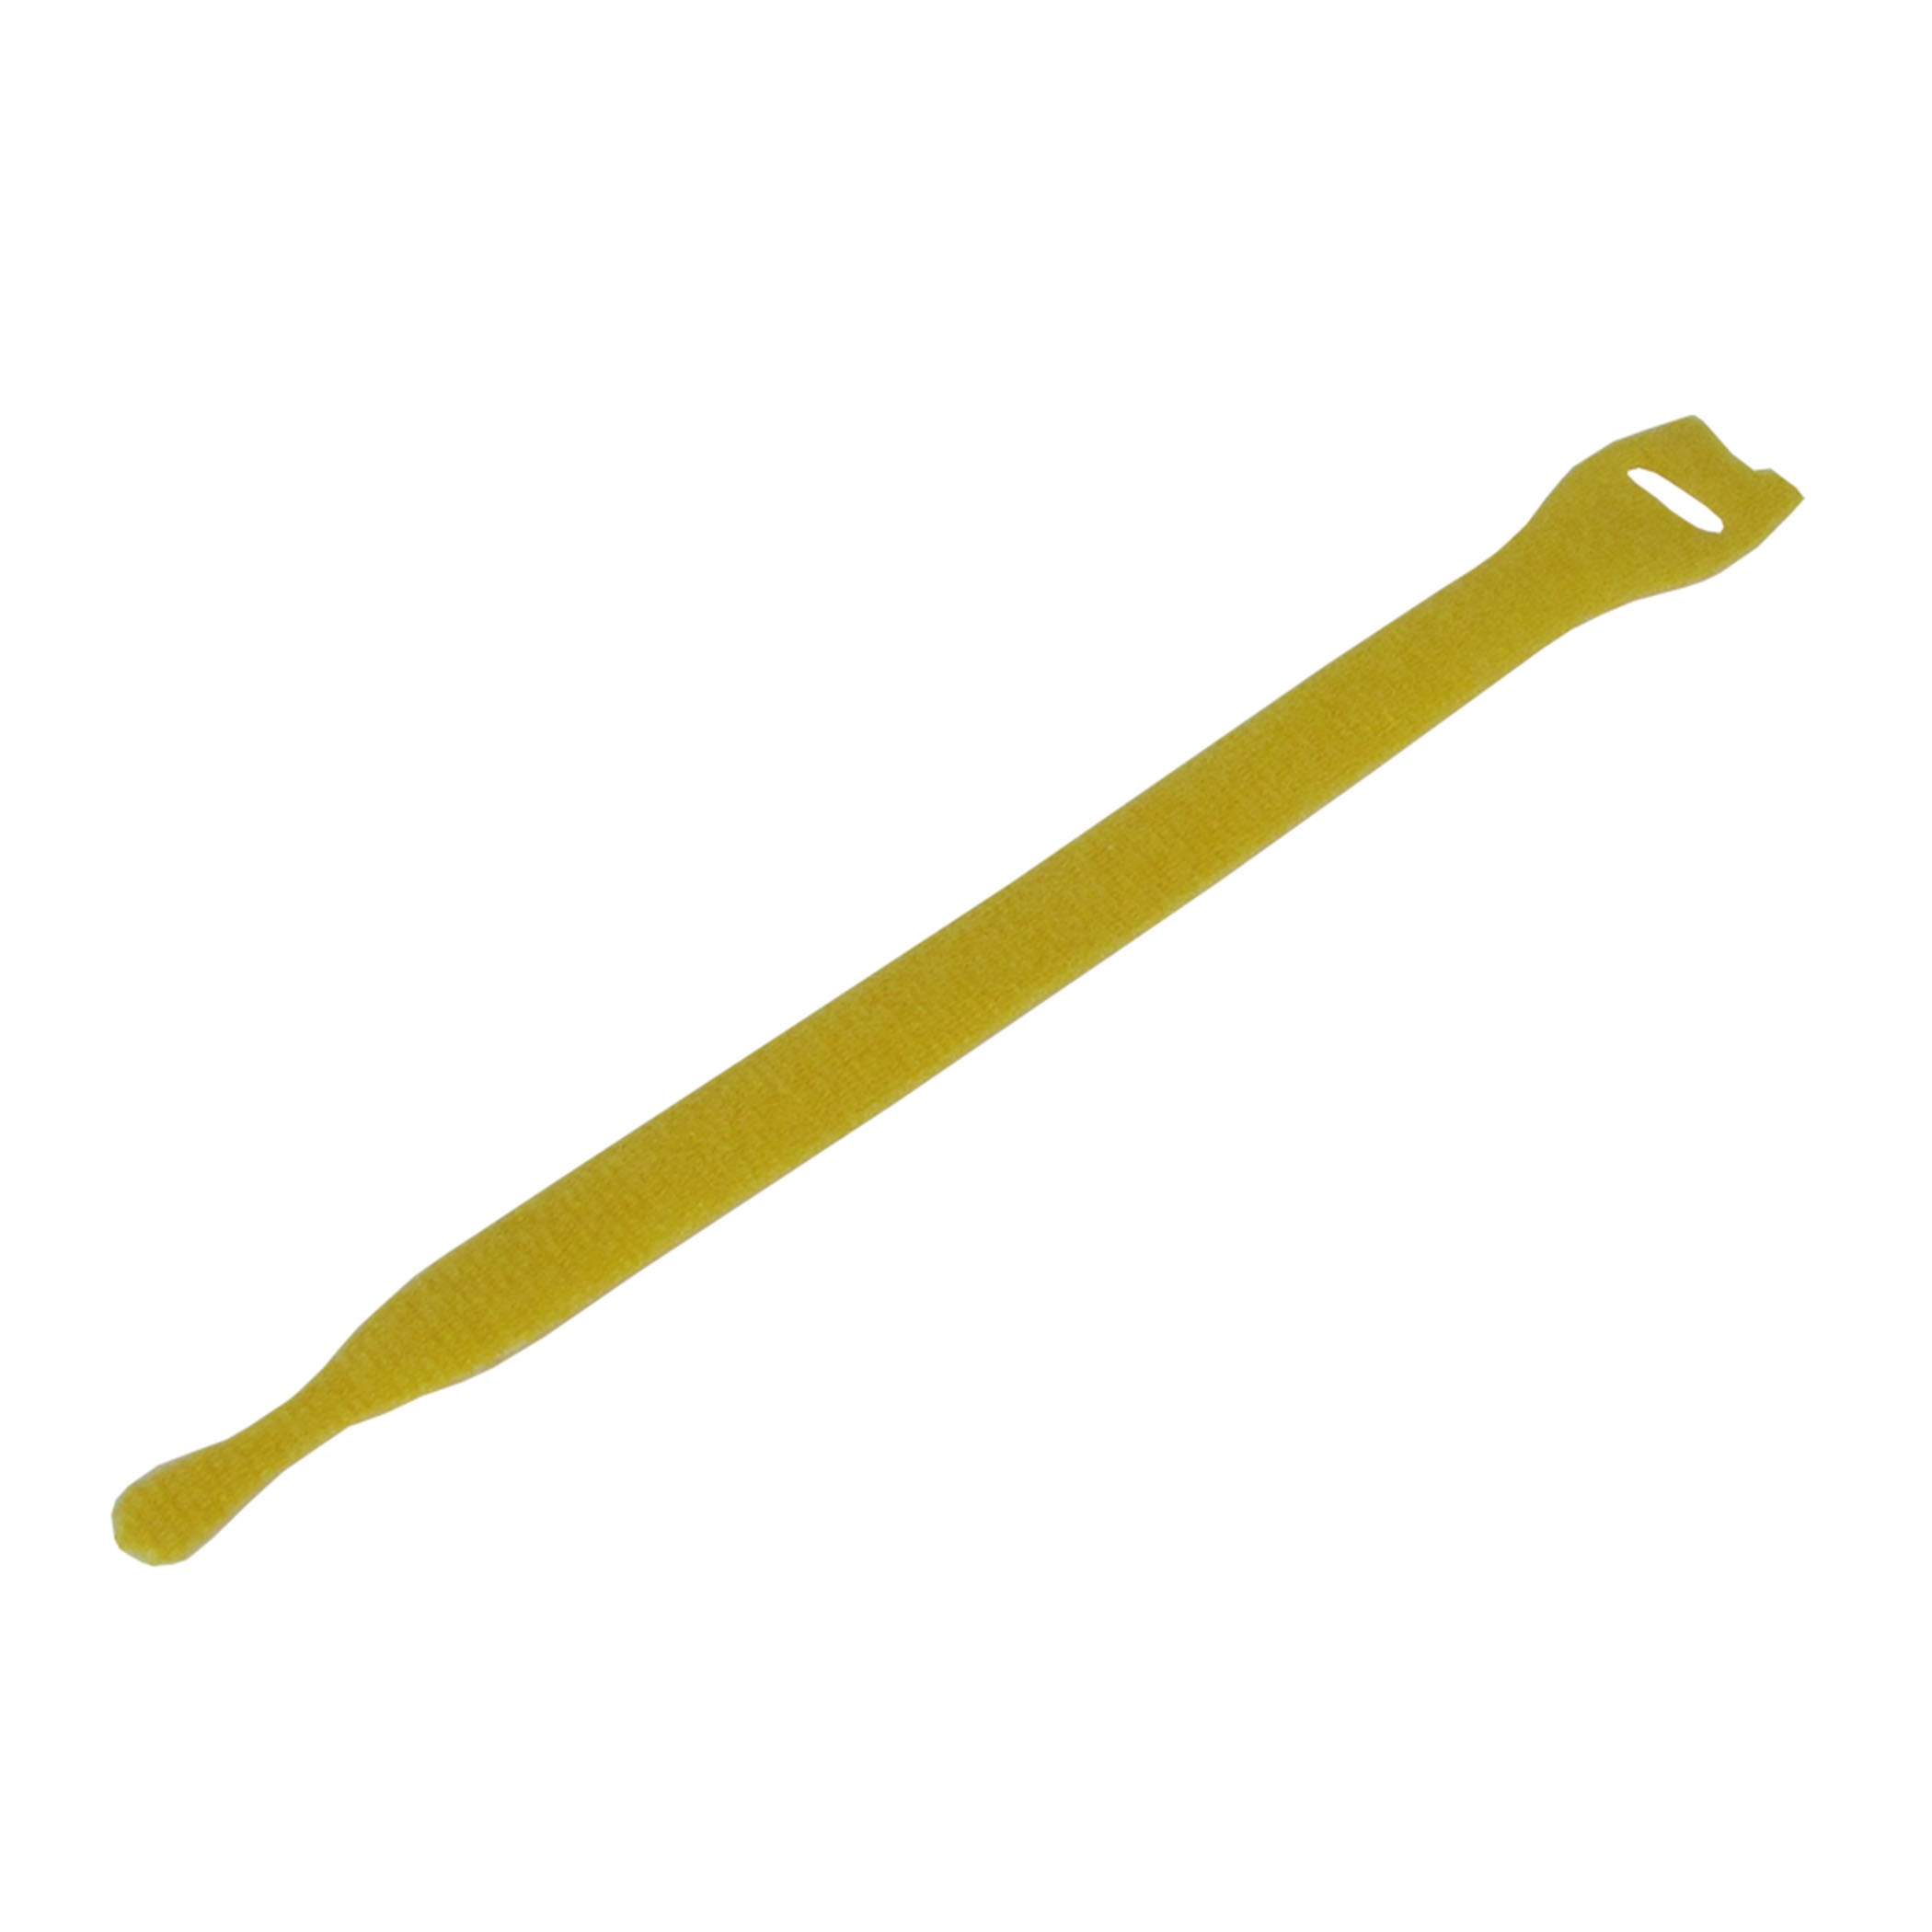 Cable Tie Yellow - t1513-300yh